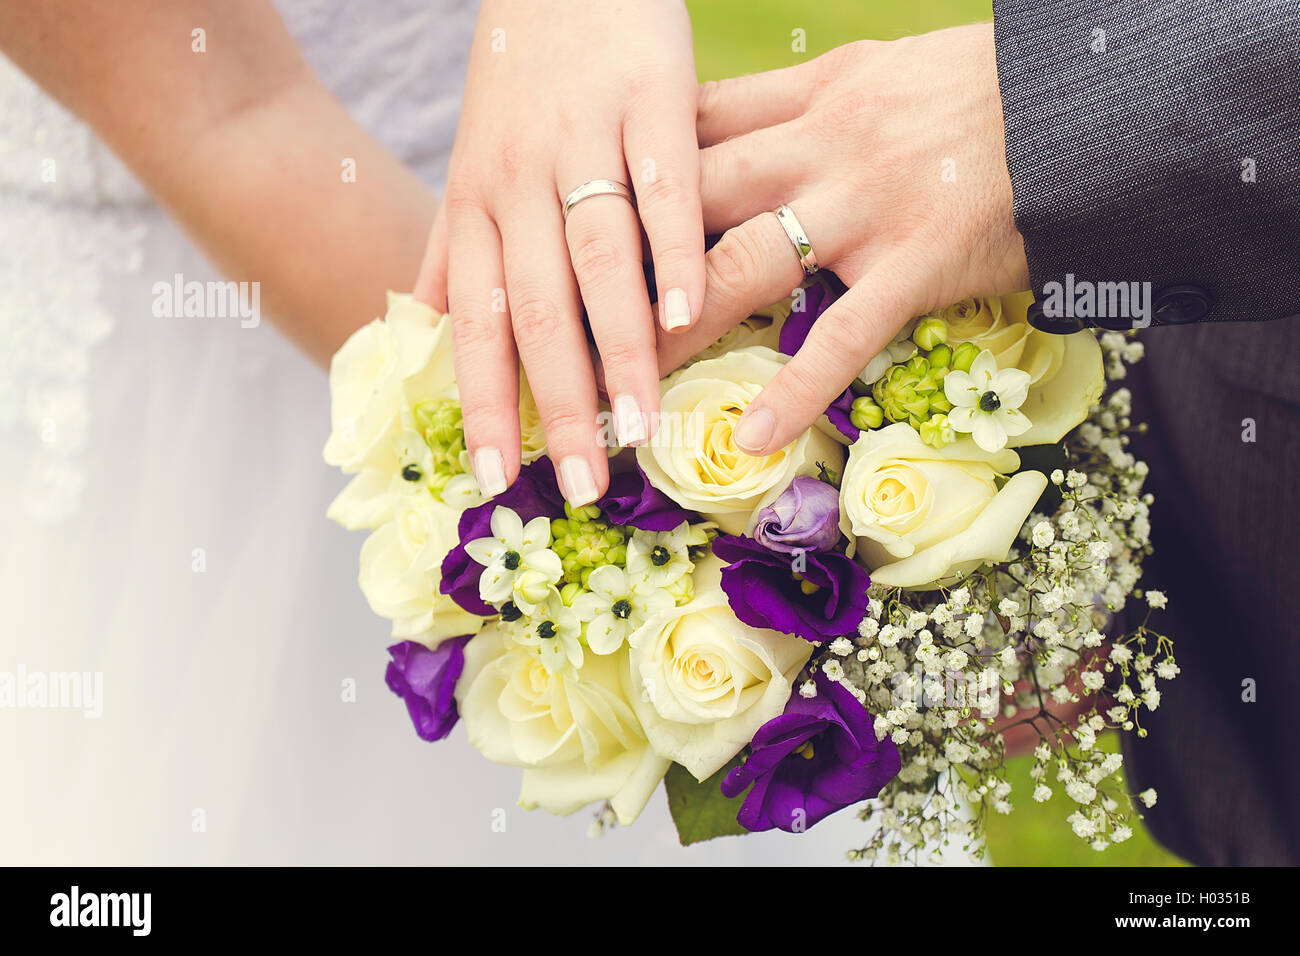 wedding rings on a bridal bouquet Stock Photo